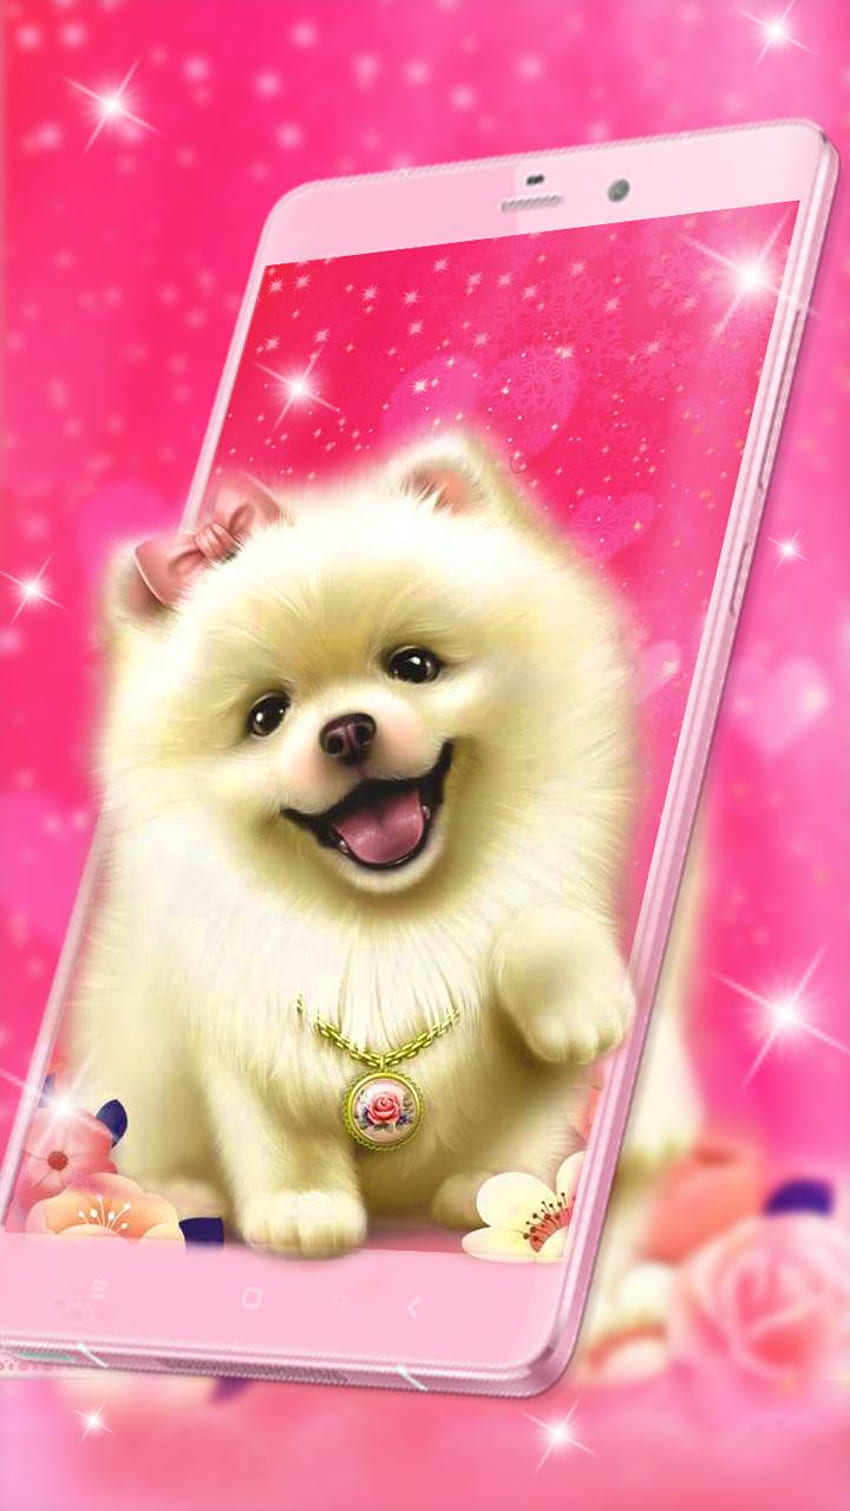 Cute Fluffy Puppy Live untuk Android, Cute Fluffy Dogs wallpaper ponsel HD